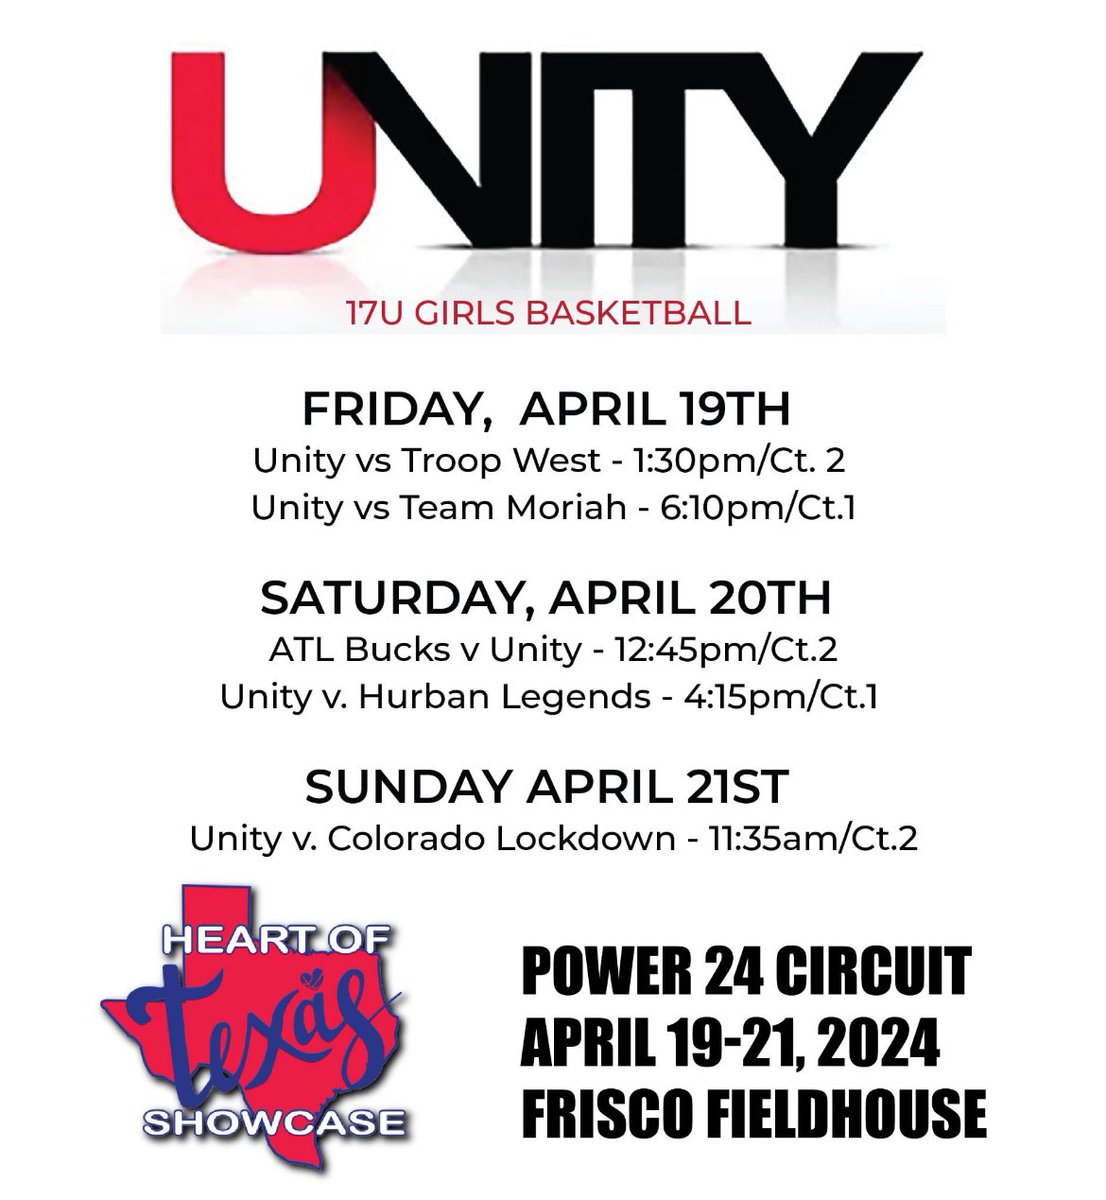 Come check us out this week at The Heart Of Texas Showcase!!